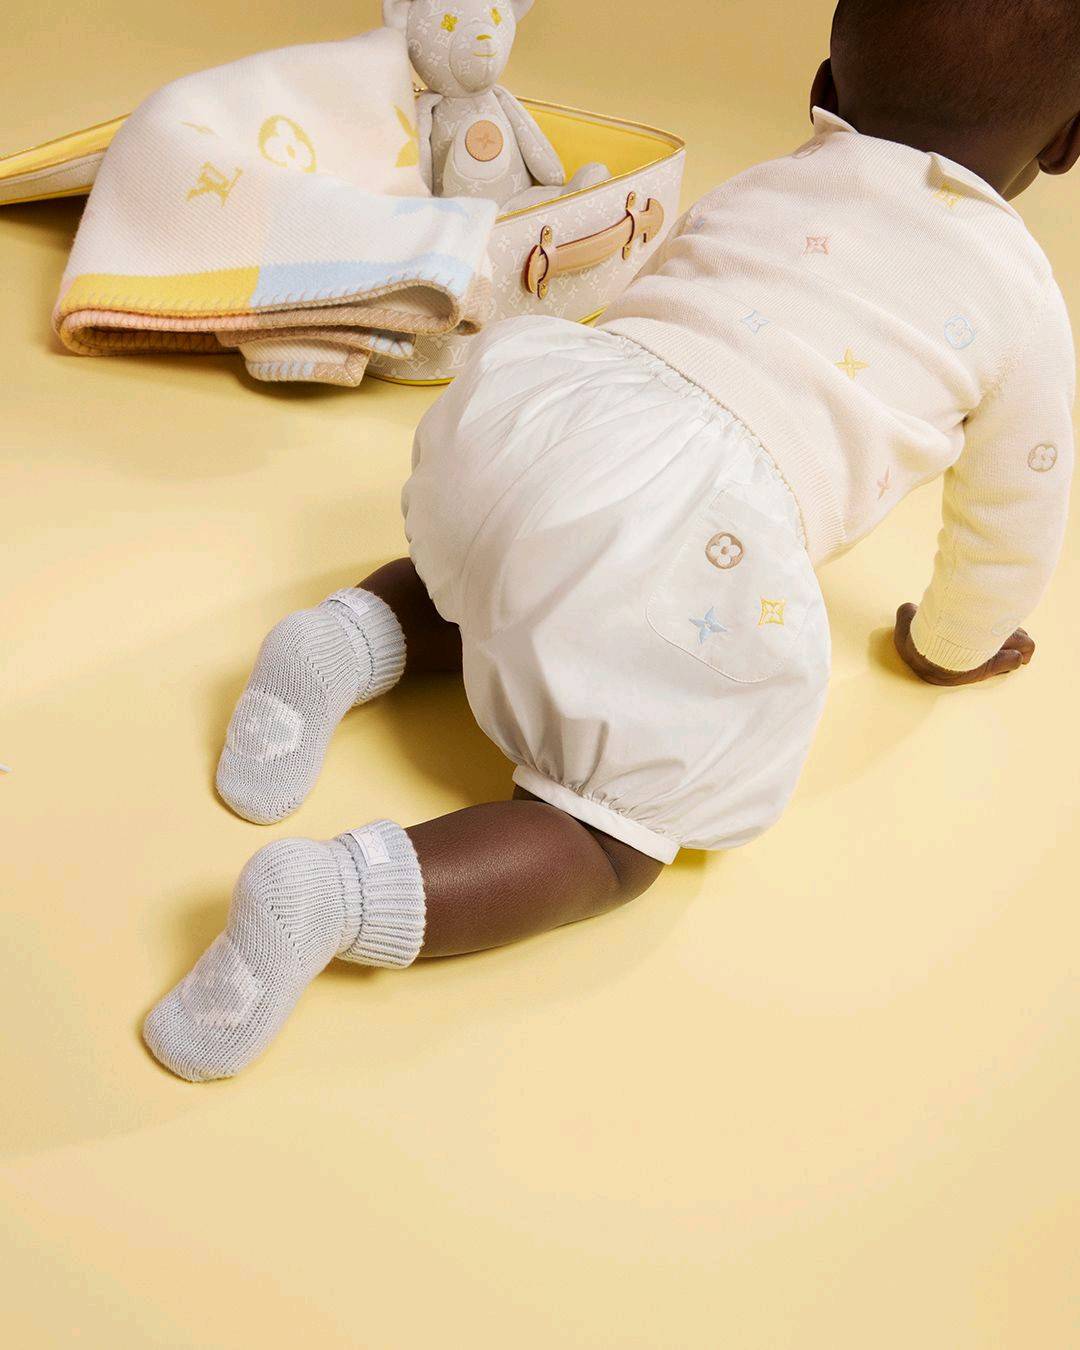 Louis Vuitton presents its first baby collection - Aspire